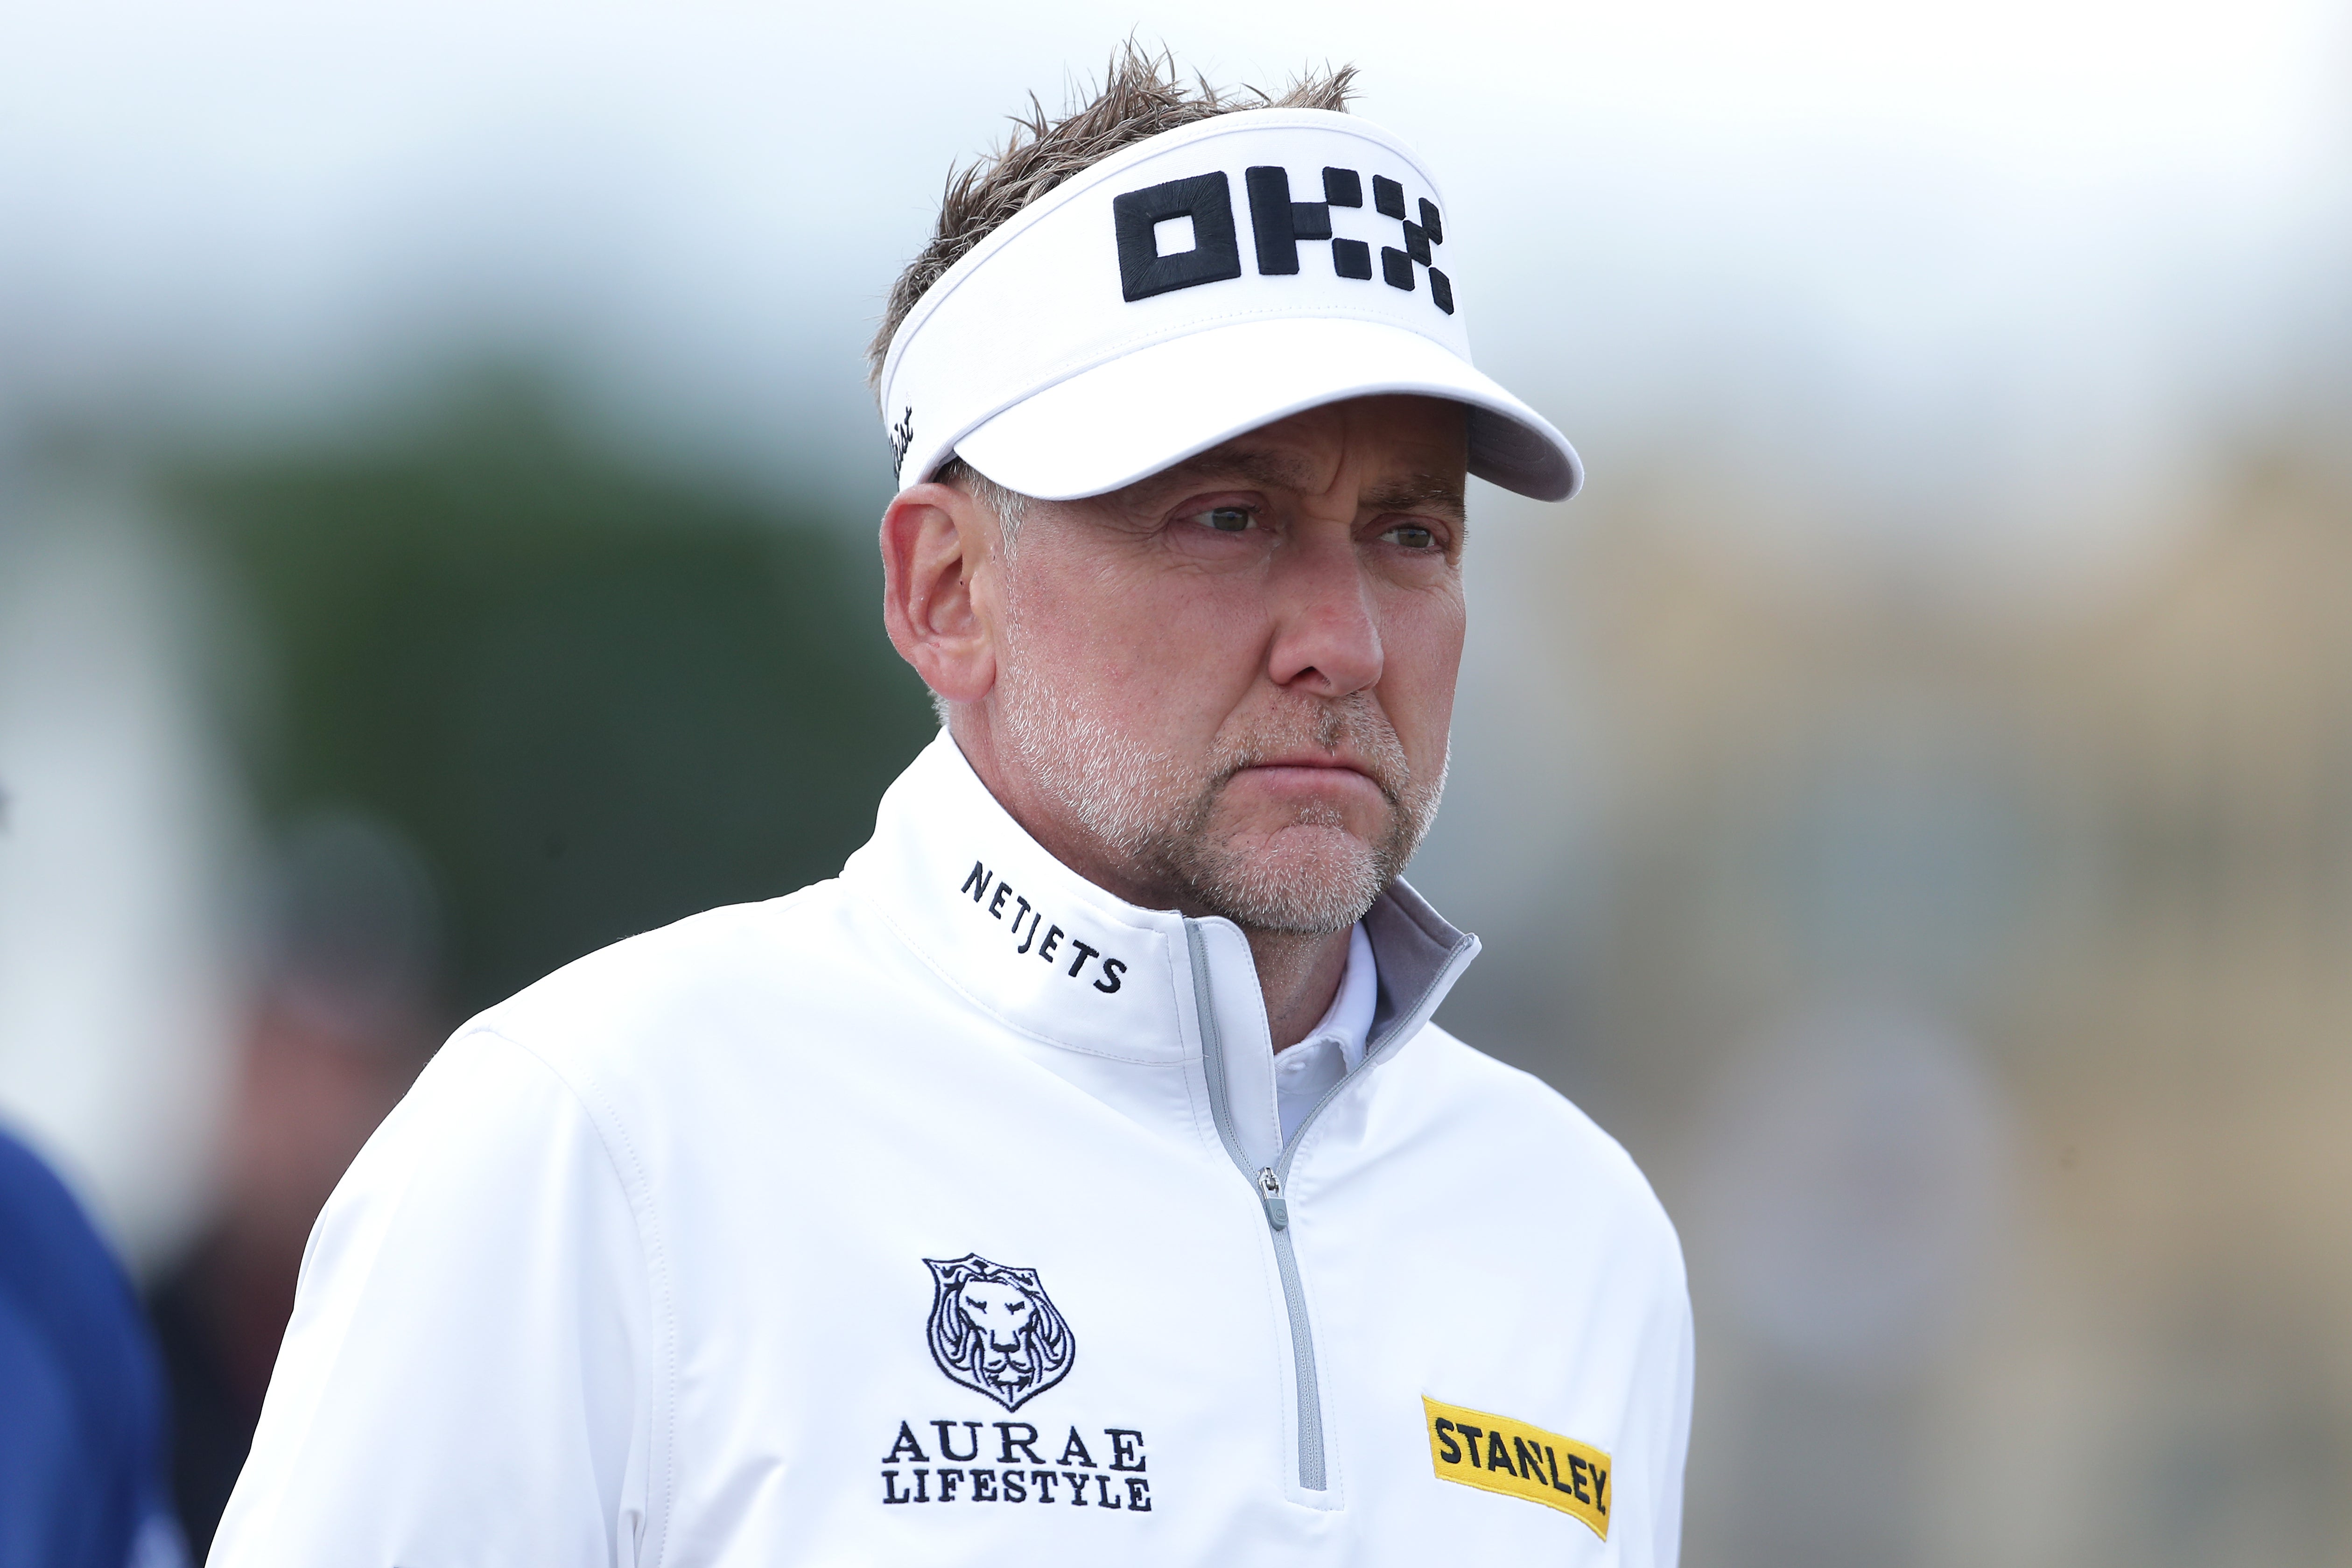 England’s Ian Poulter after teeing off the 3rd during day one of The Open at the Old Course, St Andrews. Picture date: Thursday July 14, 2022.